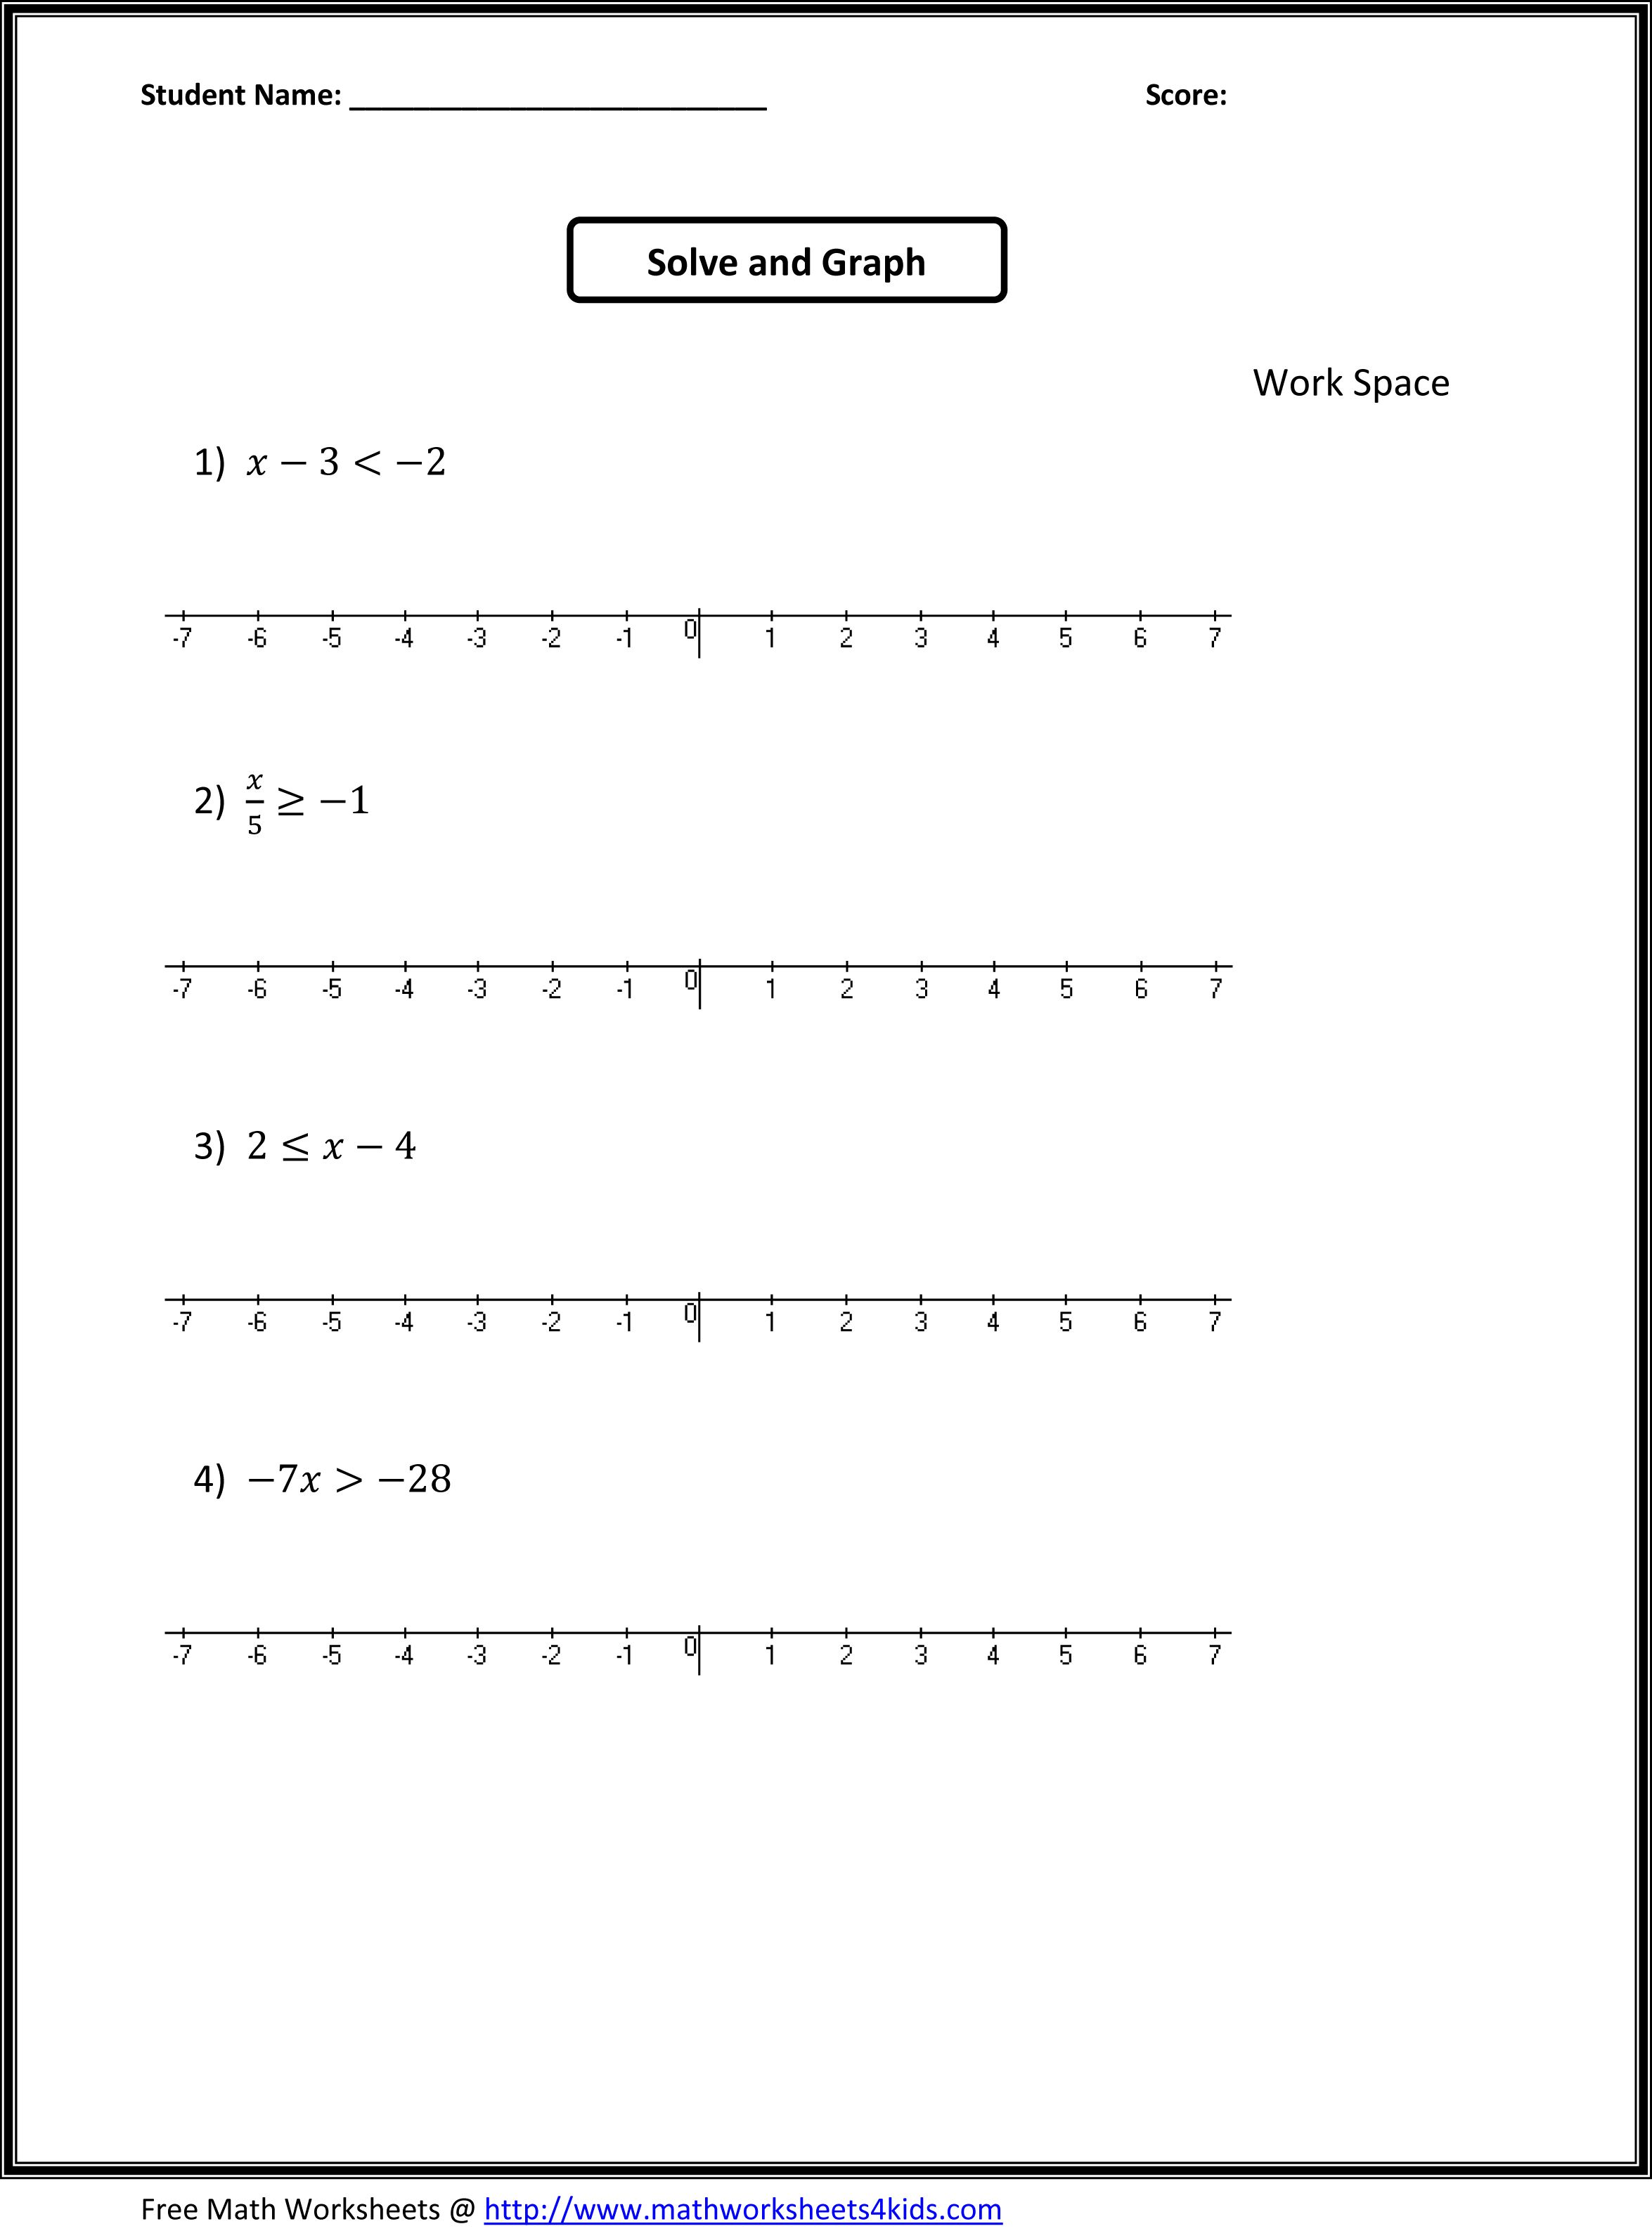 printables-math-worksheets-for-7th-graders-tempojs-thousands-of-printable-activities